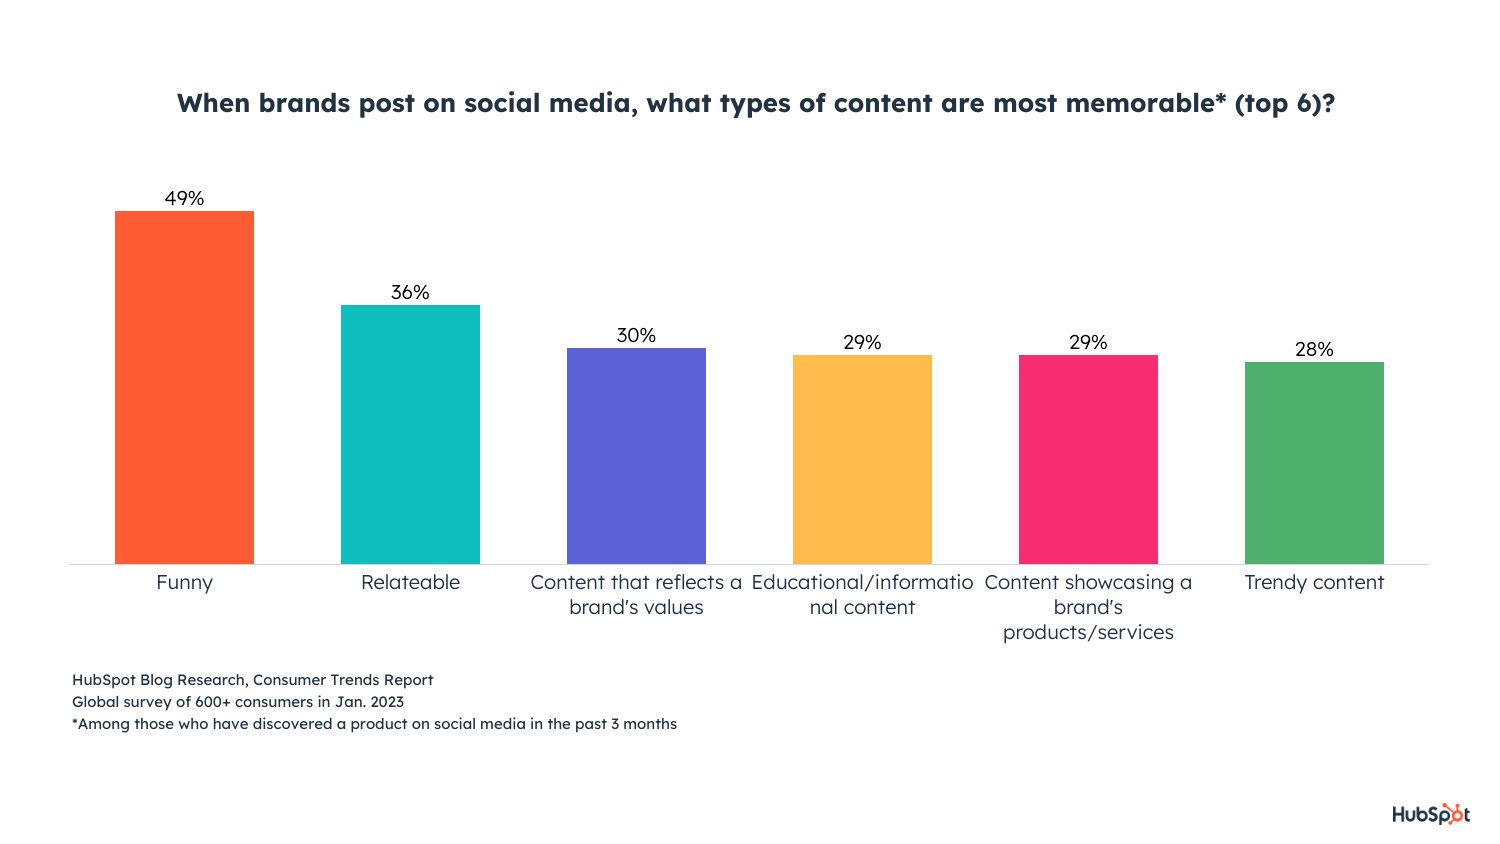 most popular types of content: graph displaying that funny content is the most memorable